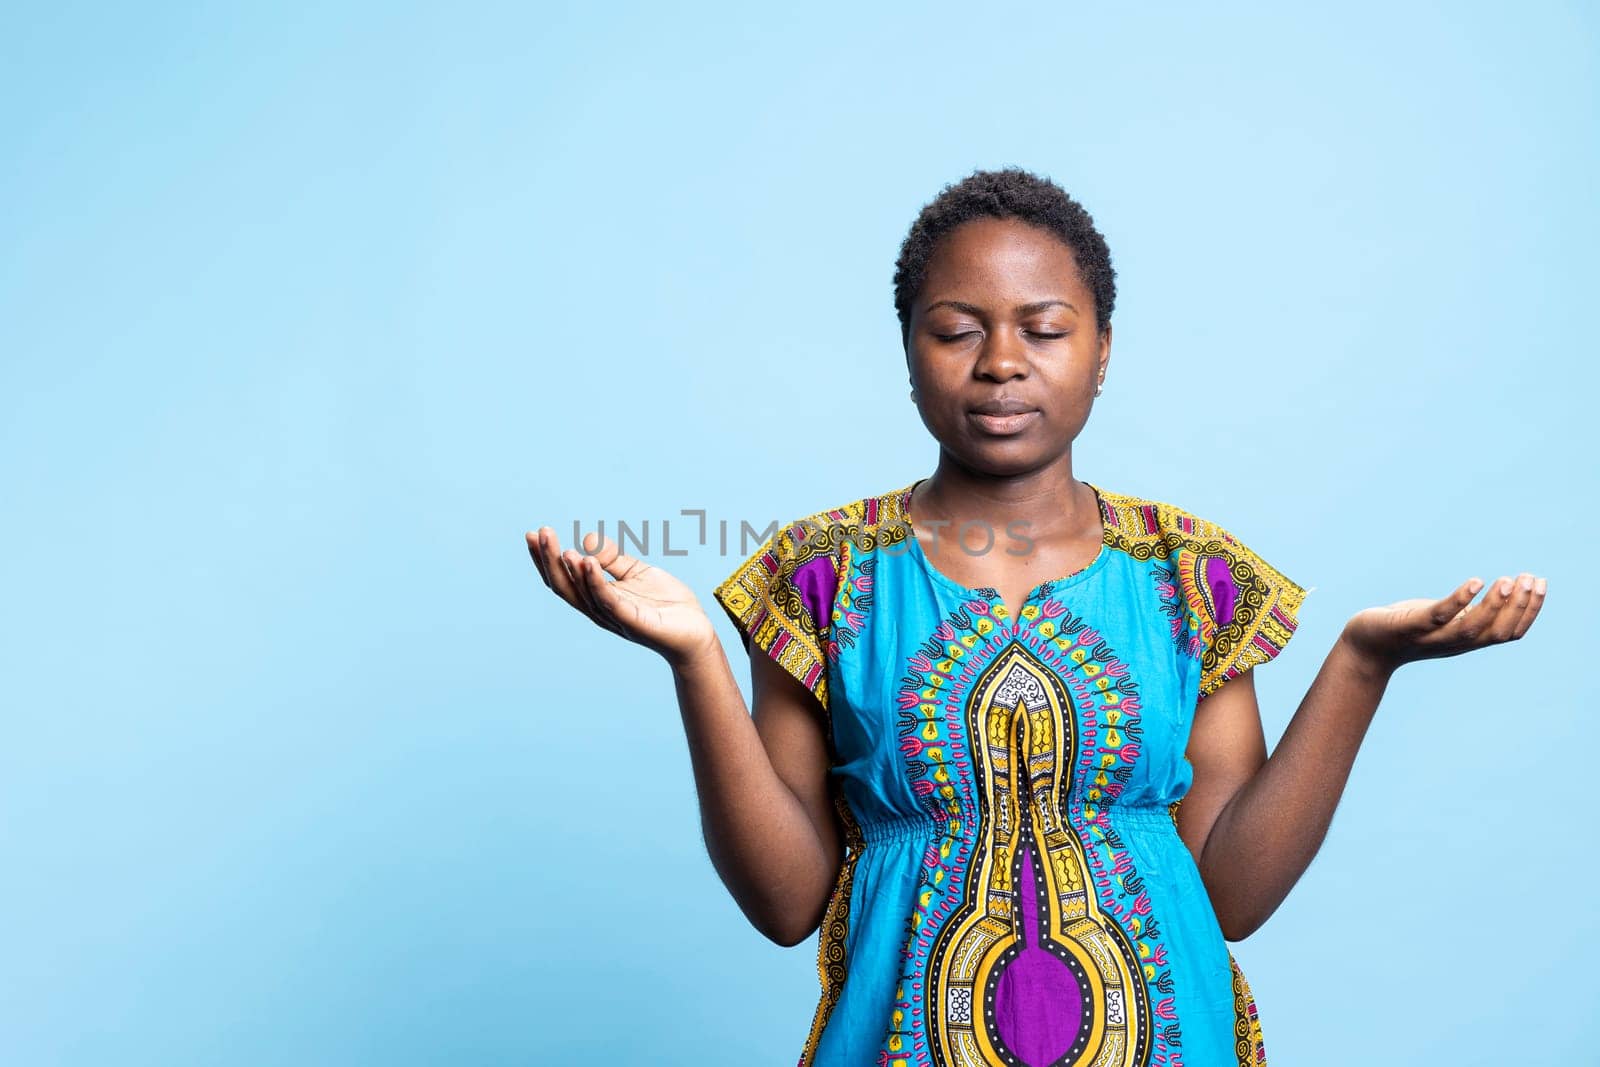 Female model praying to Jesus Christ for a miracle, expressing her belief in Christianity and the Lord over blue background. Religious pious woman saying a prayer, worshipping God.